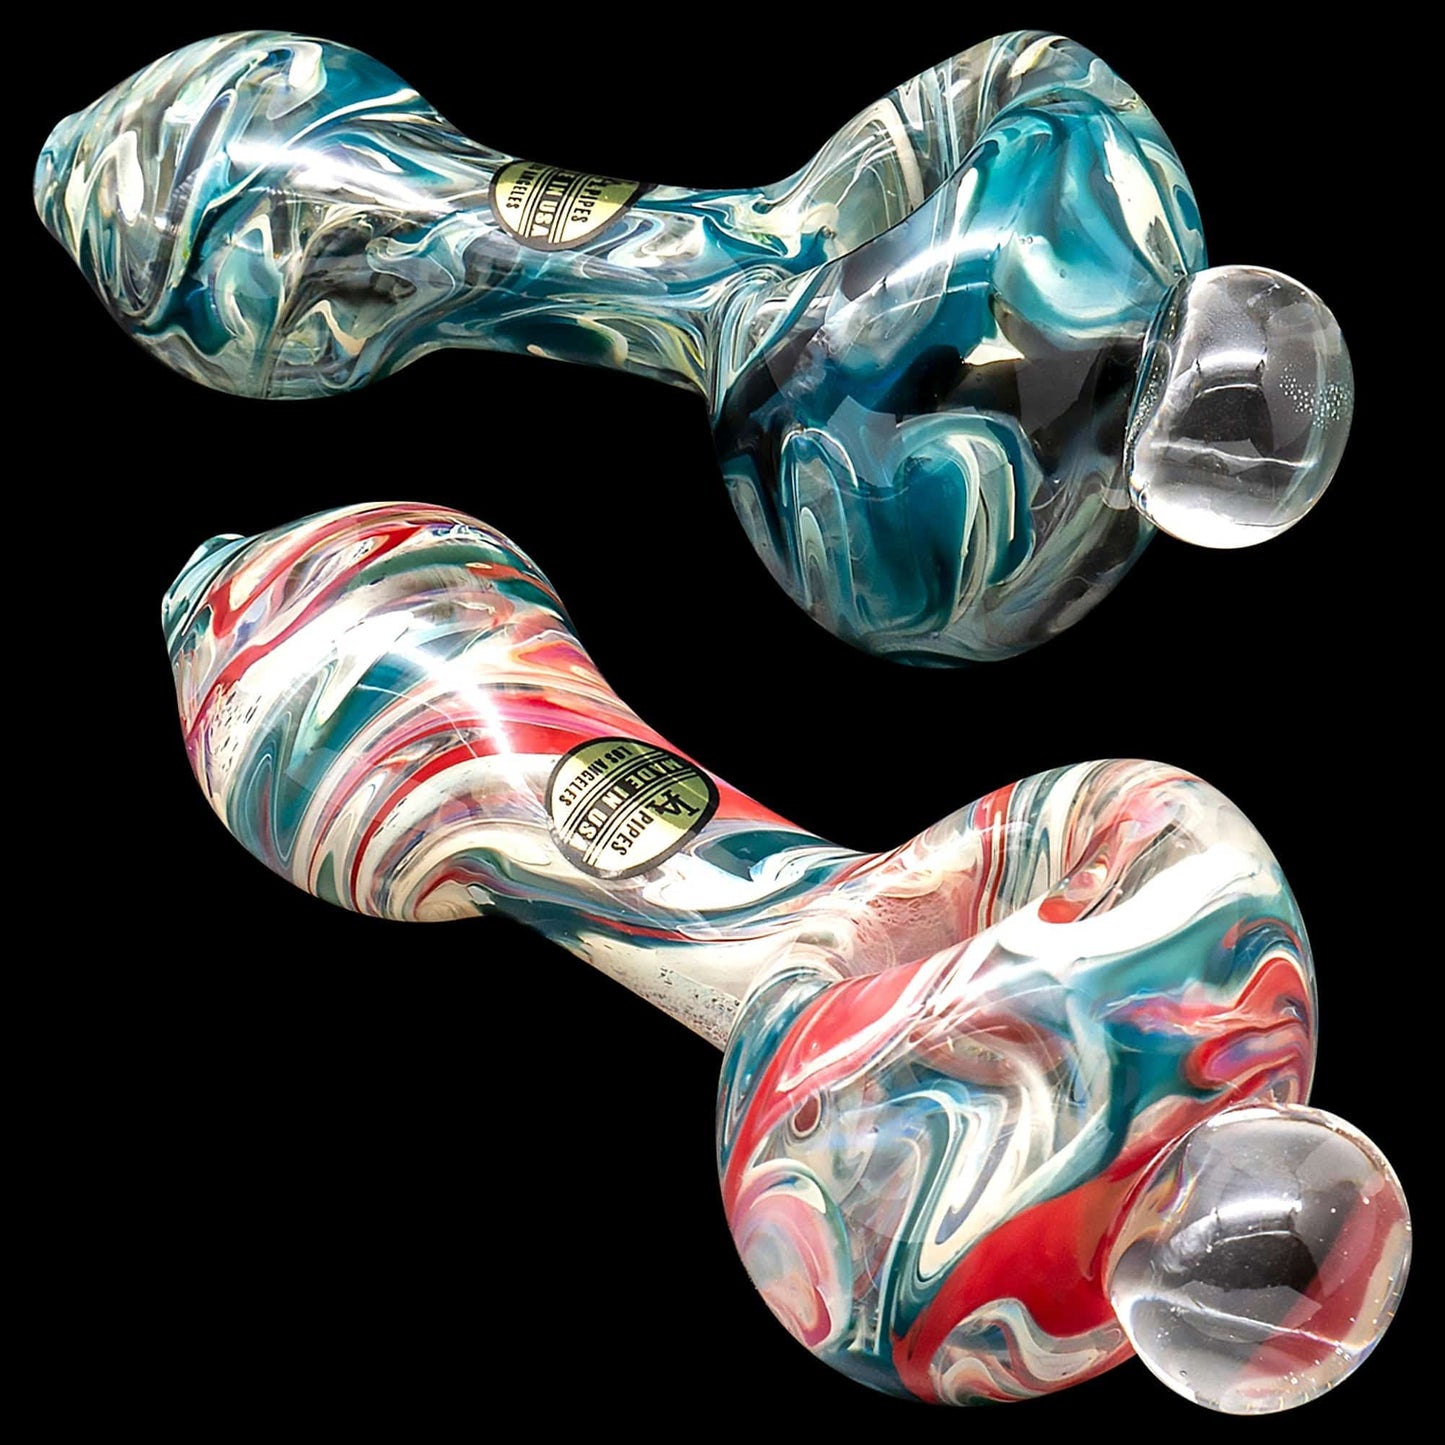 LA Pipes Hand Pipe "Primordial Ooze" Glass Spoon Pipe